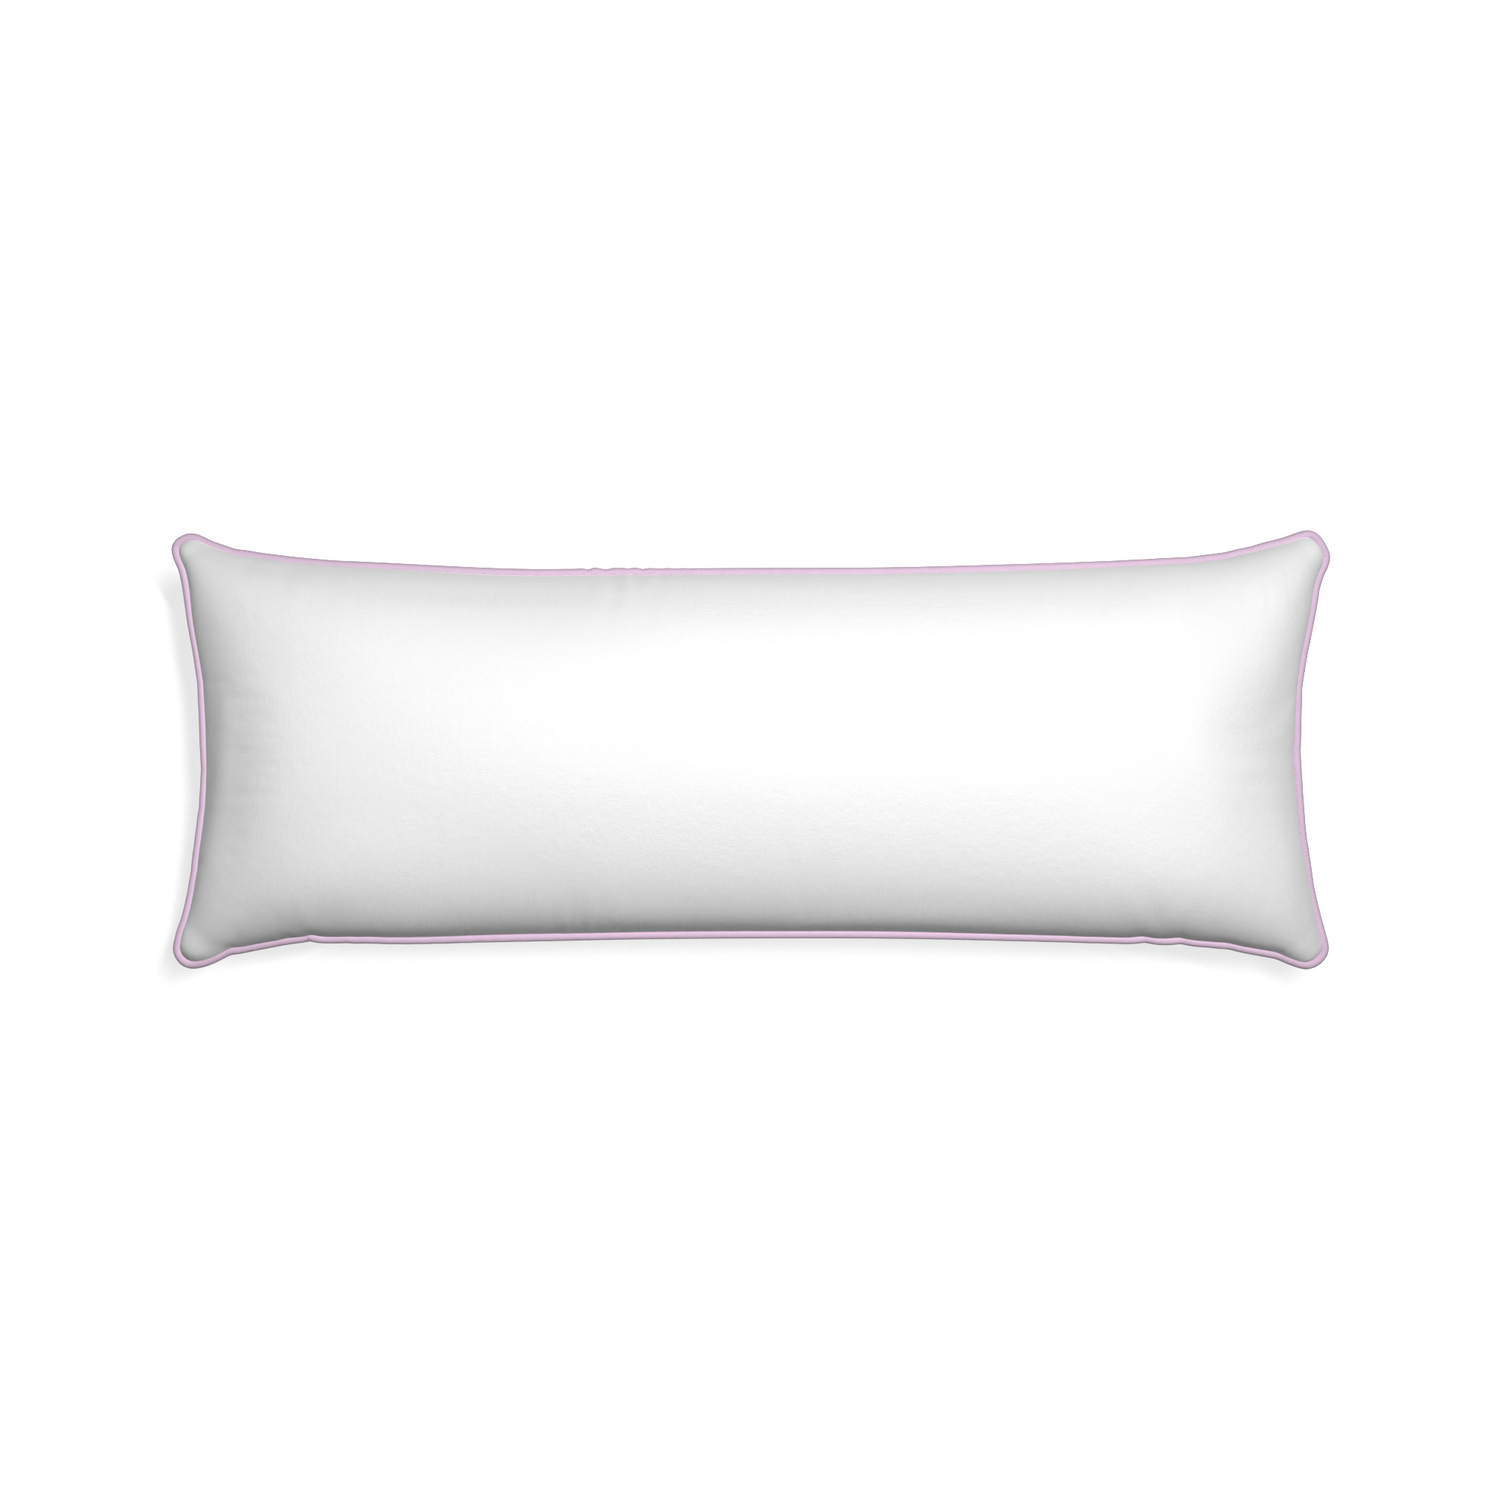 Xl-lumbar snow custom white cottonpillow with l piping on white background